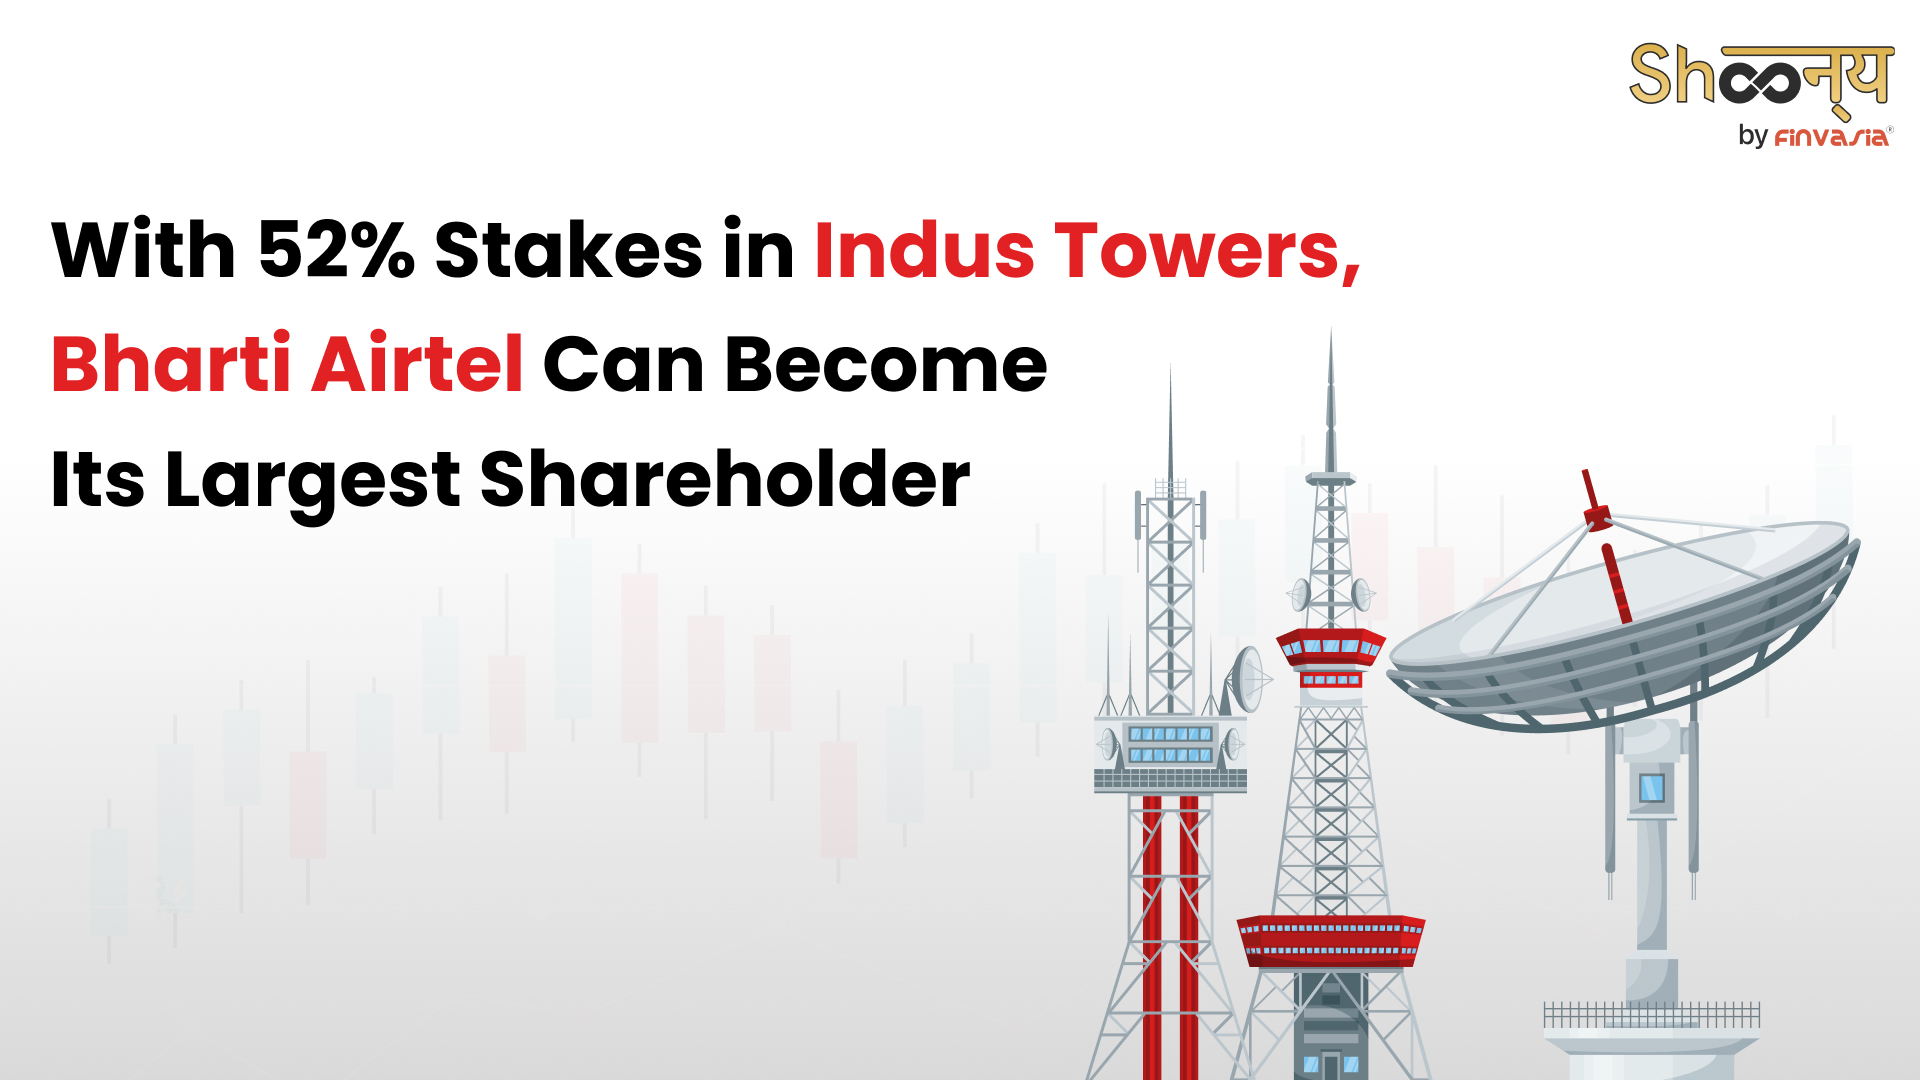 
  Bharti Airtel In Talks With Vodafone To Become Largest Shareholder In Indus Towers